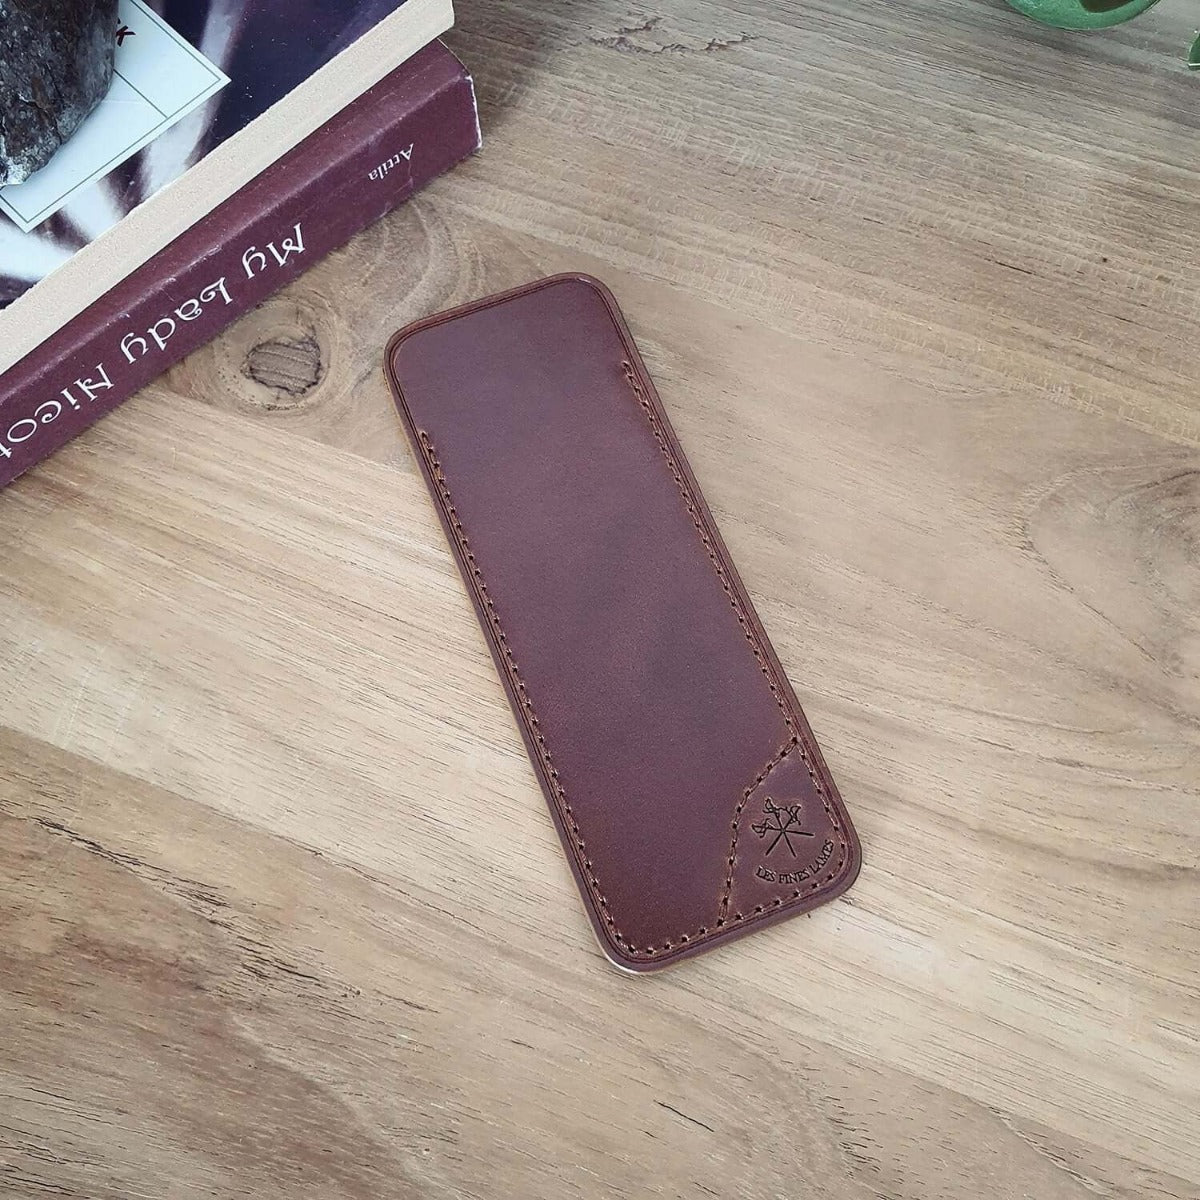 A Cigar Knife Tan Leather Case by KirbyAllison.com bookmark resting on a wooden table.